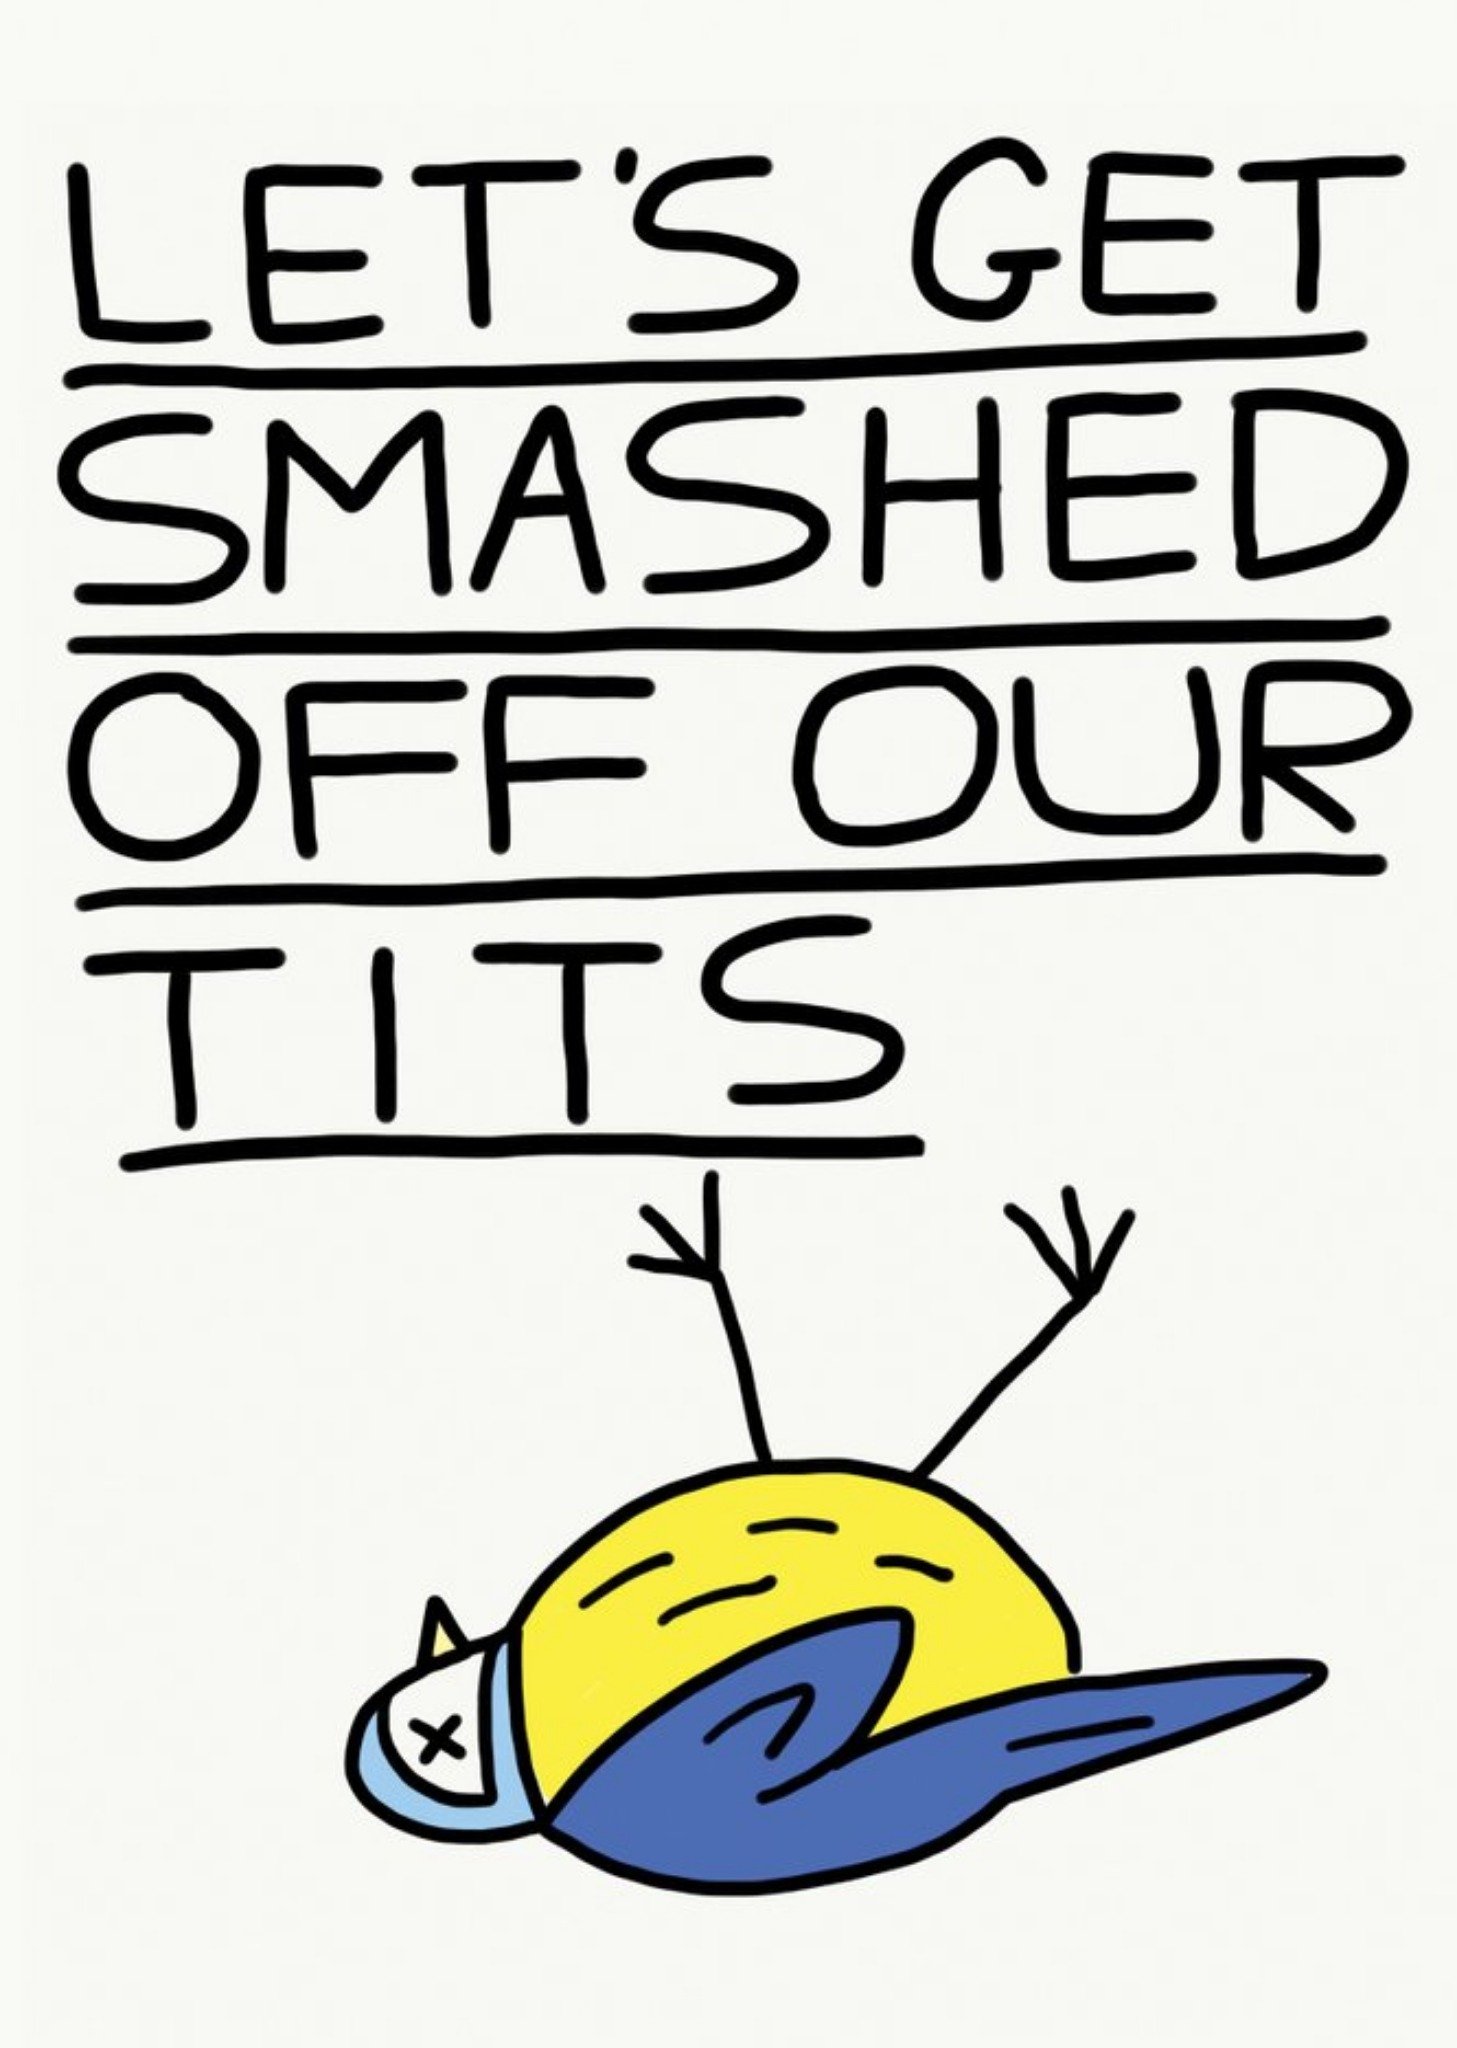 Jolly Awesome Let's Get Smashed Our Tits Bird Card, Large